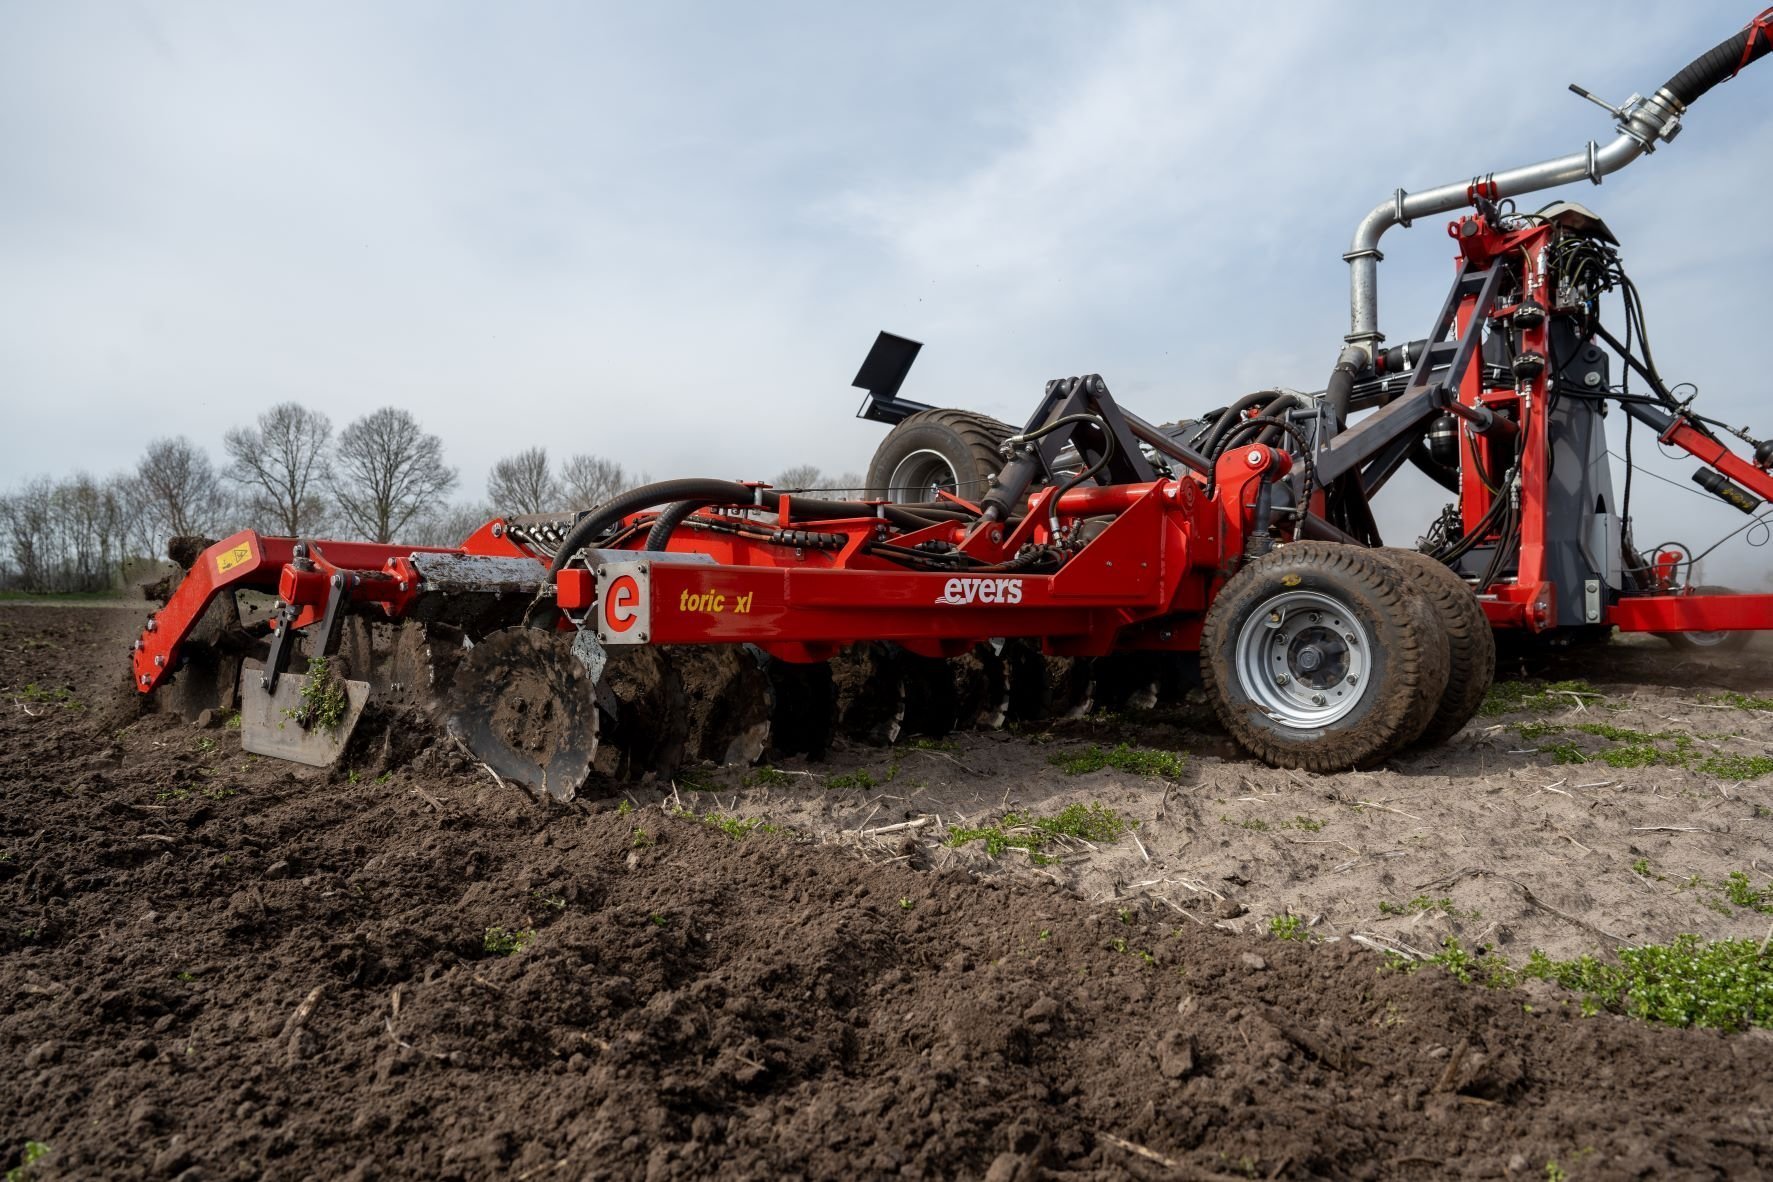 Evers slurry disc injector, Type Toric XL 1200, the discs of Ø 41,5 cm open and prepare the soil surface to a working depth of 10 cm